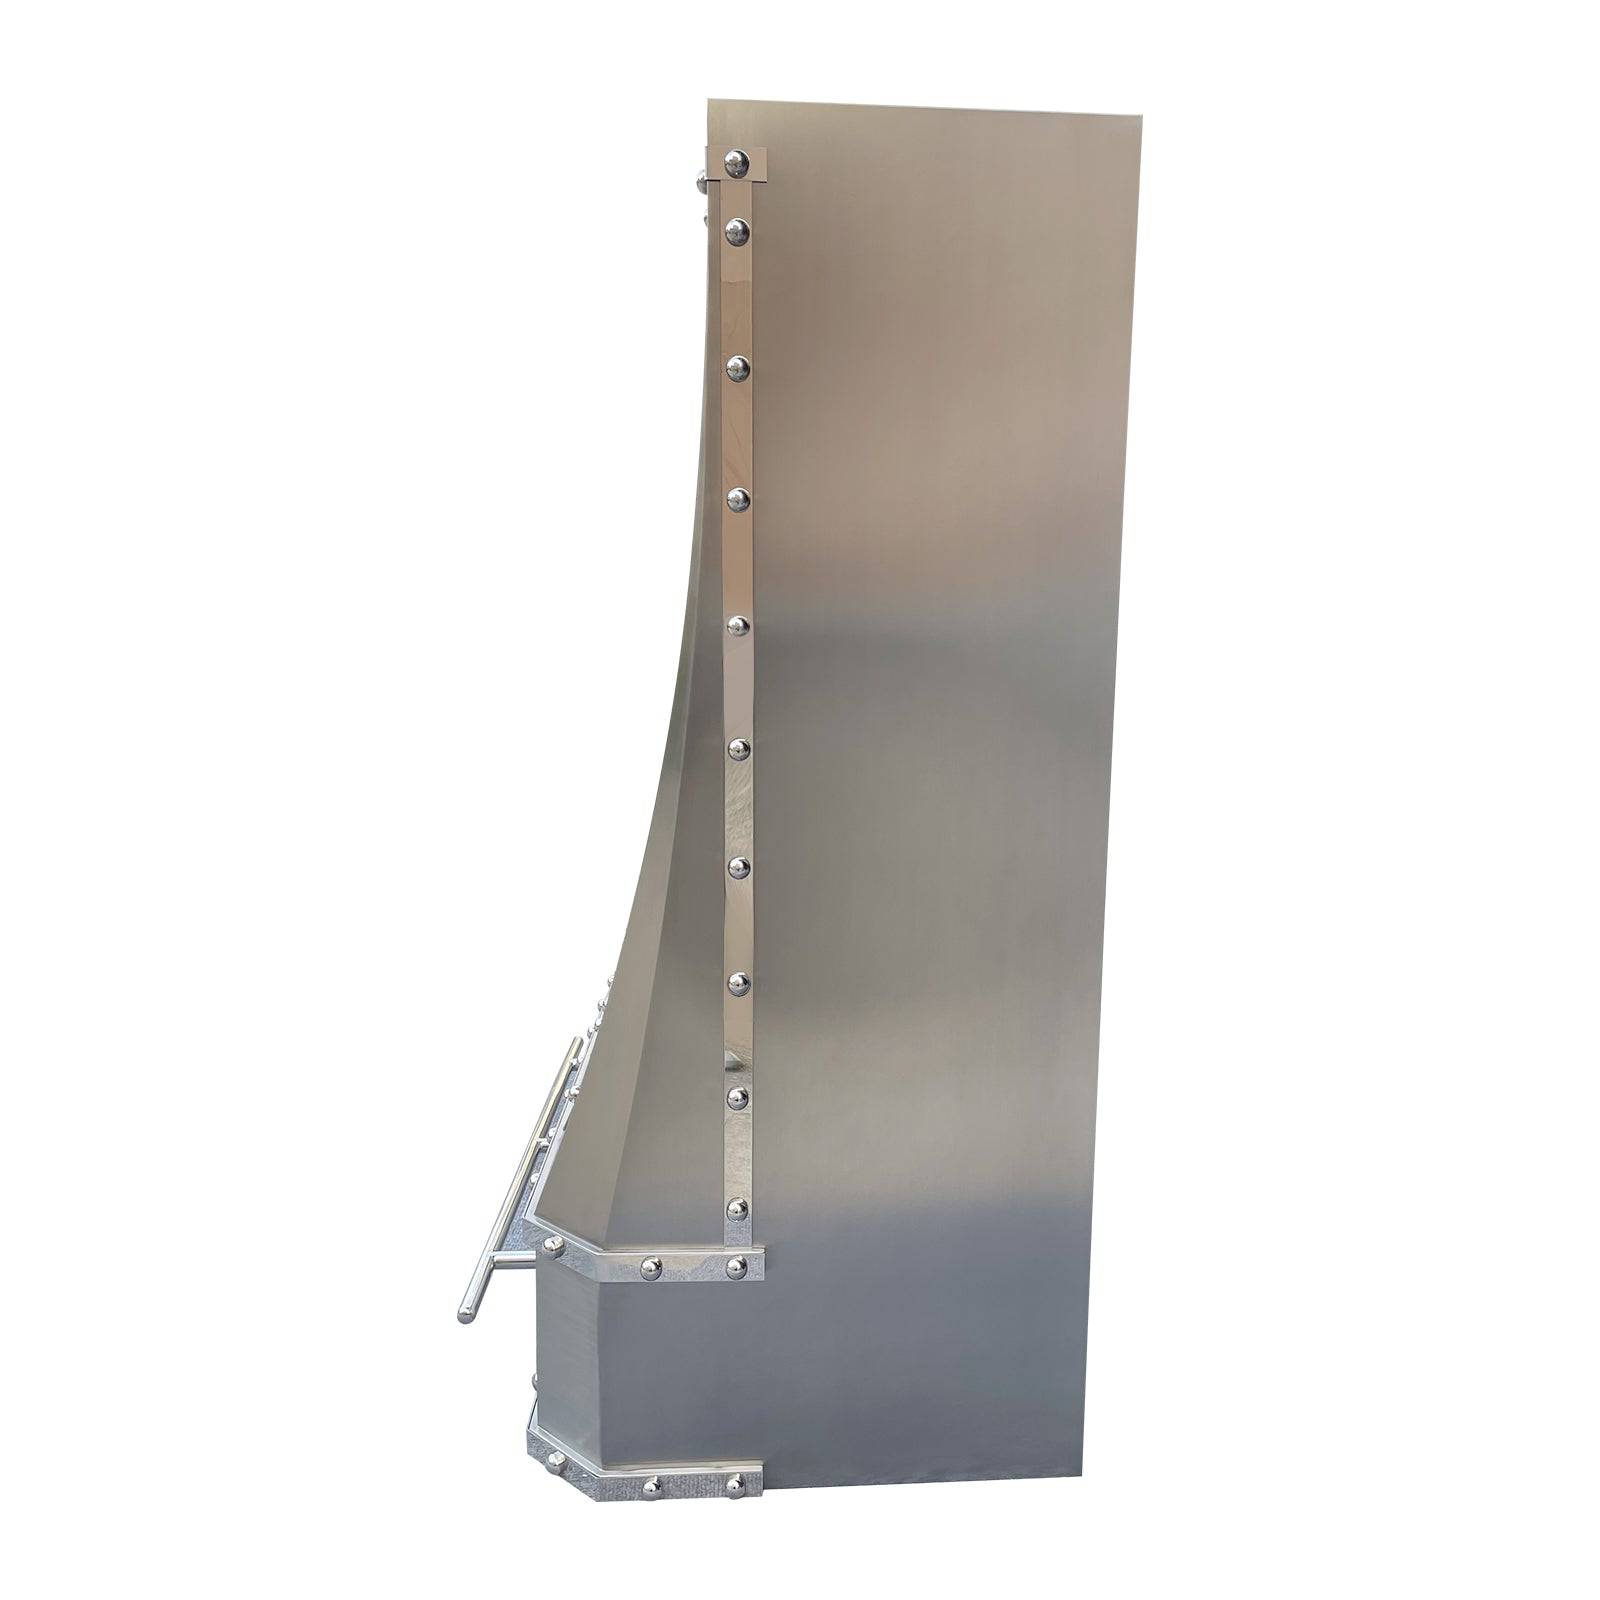 Fobest Custom Handcrafted Brushed Stainless Steel Range Hood with Curved Design FSS-137 - Stainless Steel Range Hood-Fobest Appliance